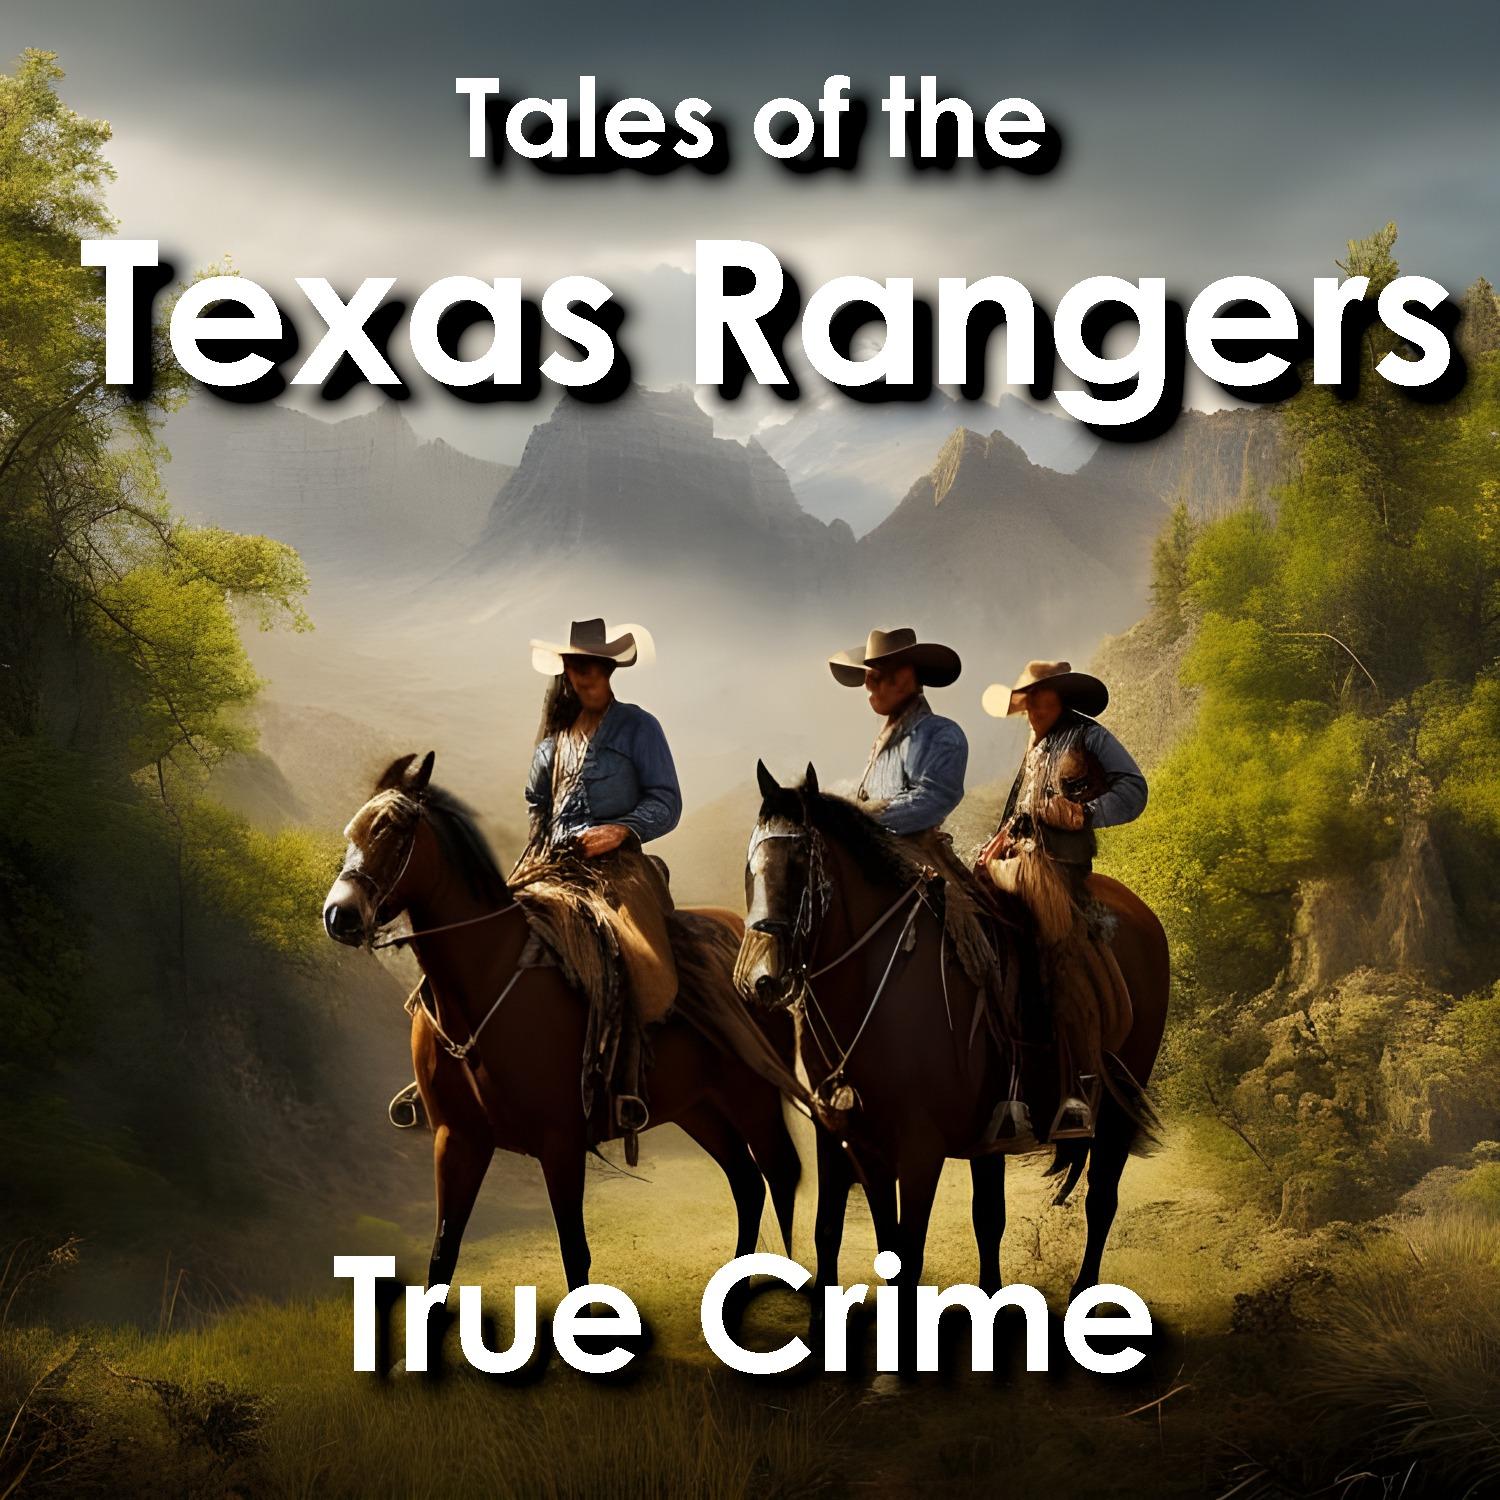 Tales of the Texas Rangers - True Crime in the Old West